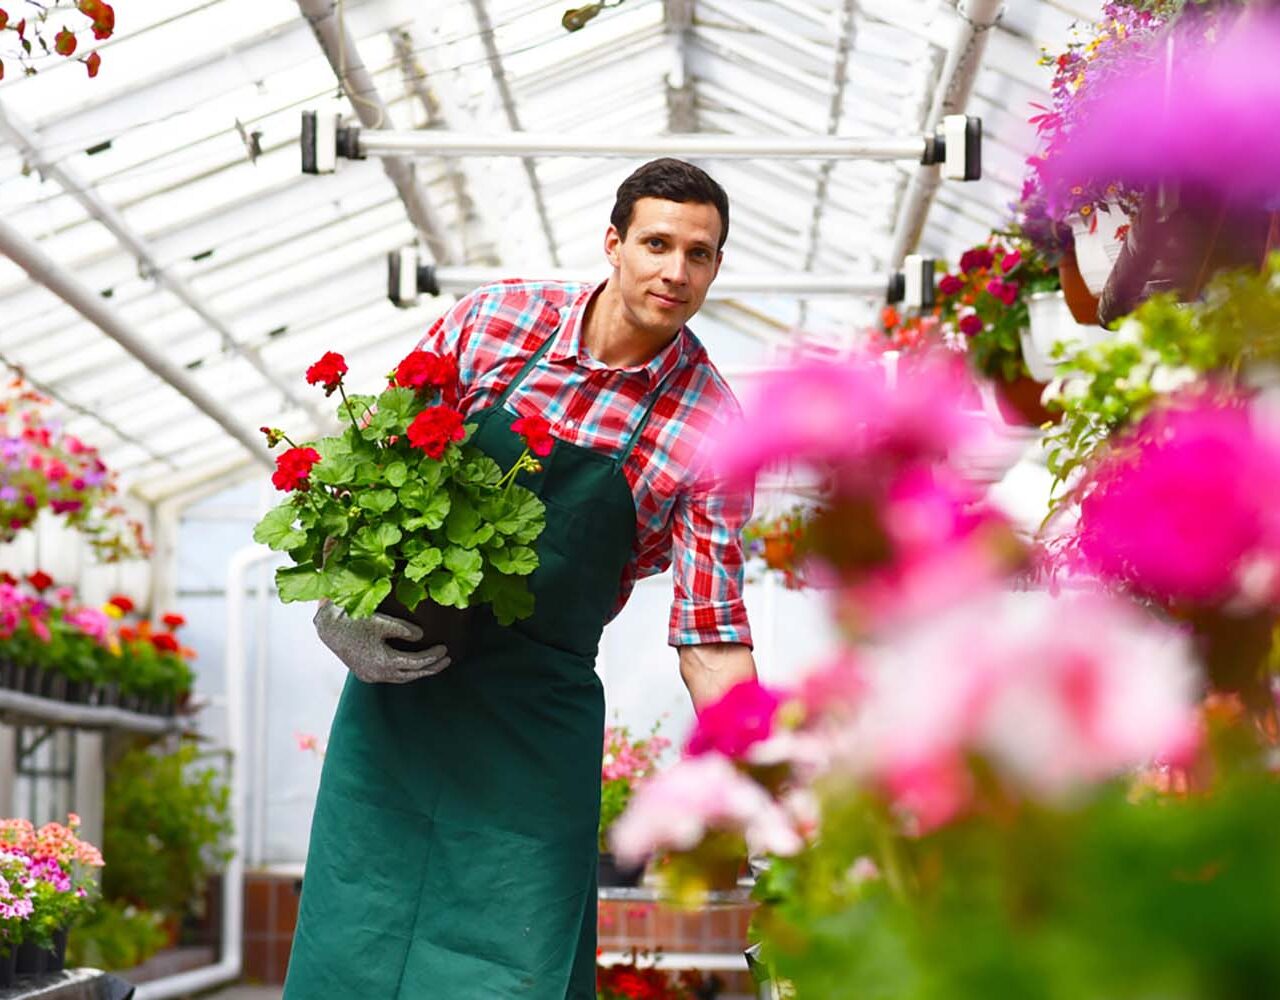 Gardener works in a greenhouse with flowers